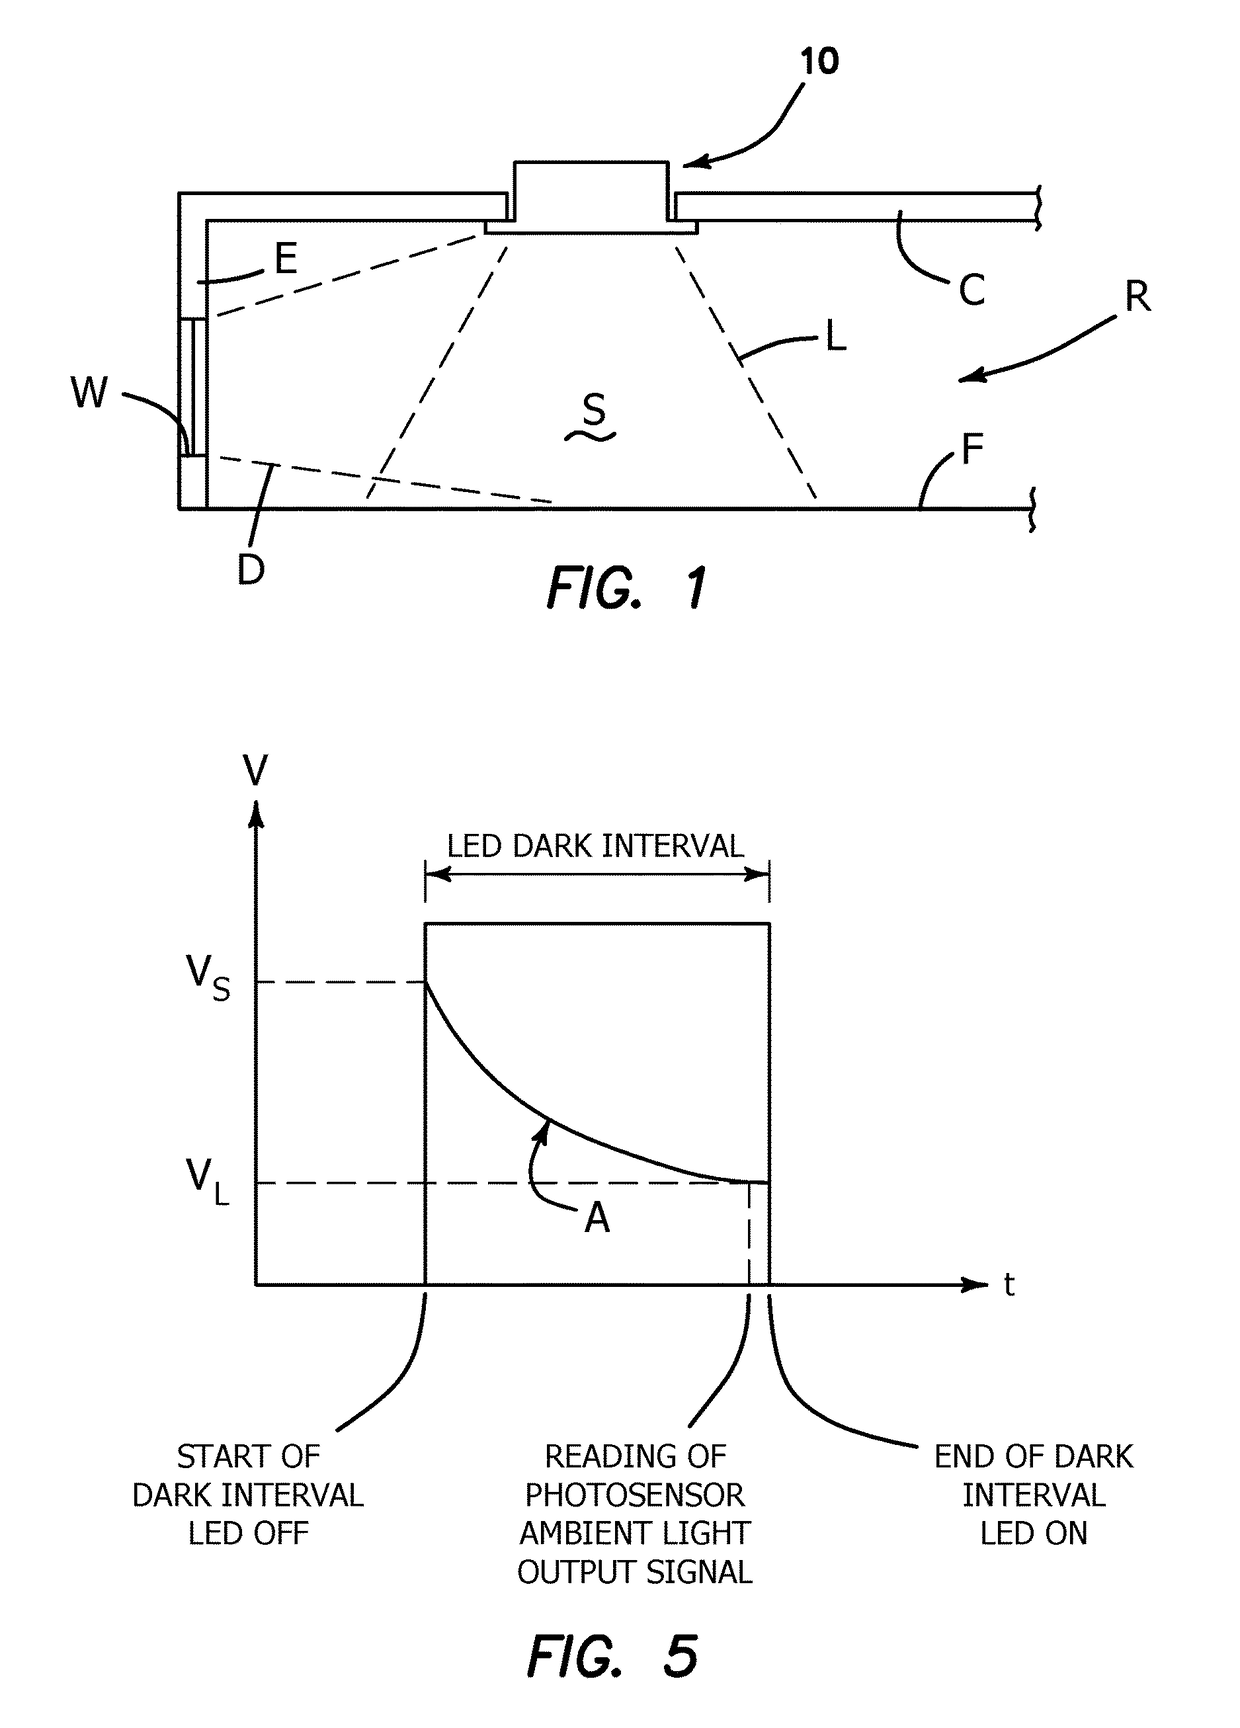 Daylight harvesting light fixture and control system for same